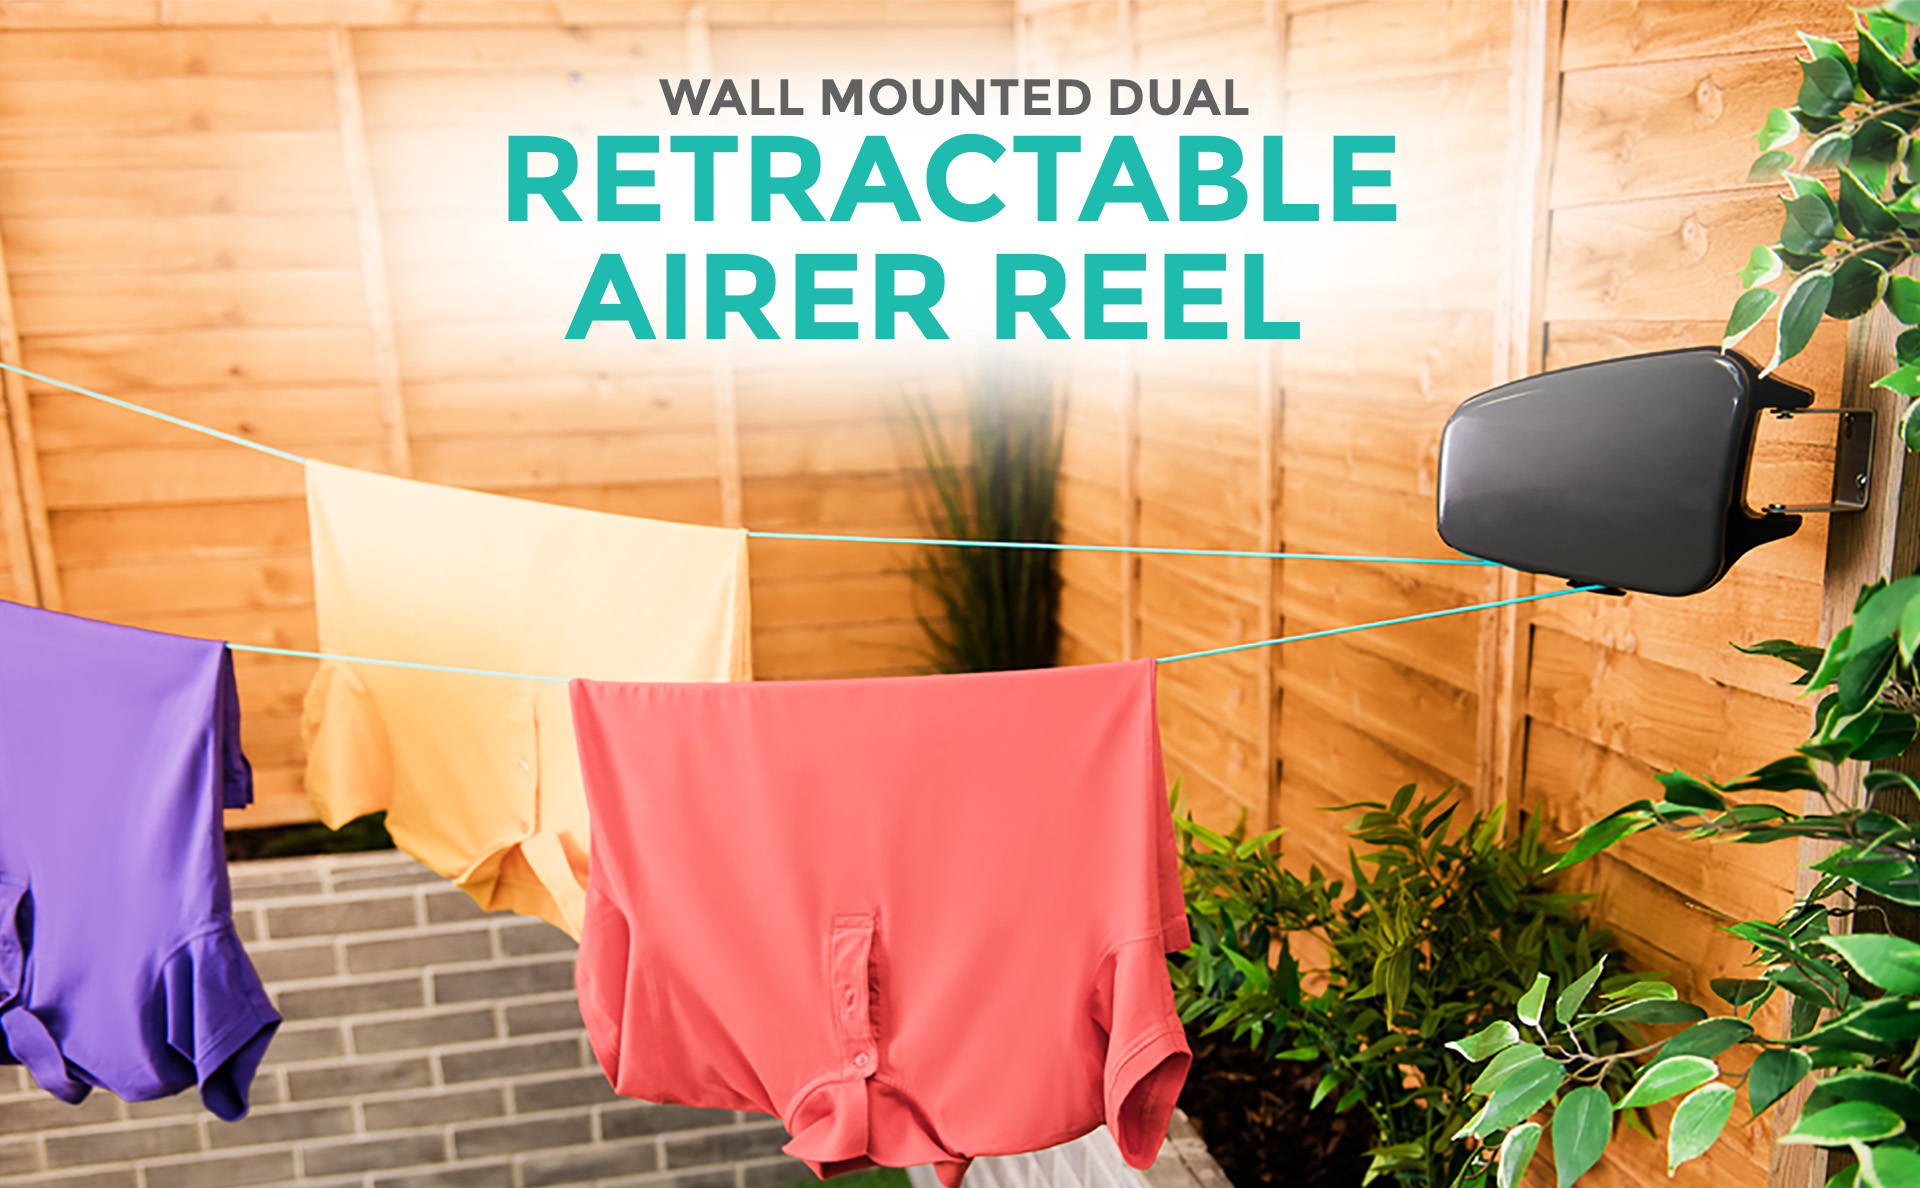 Wall-mounted Retractable Airer Reel